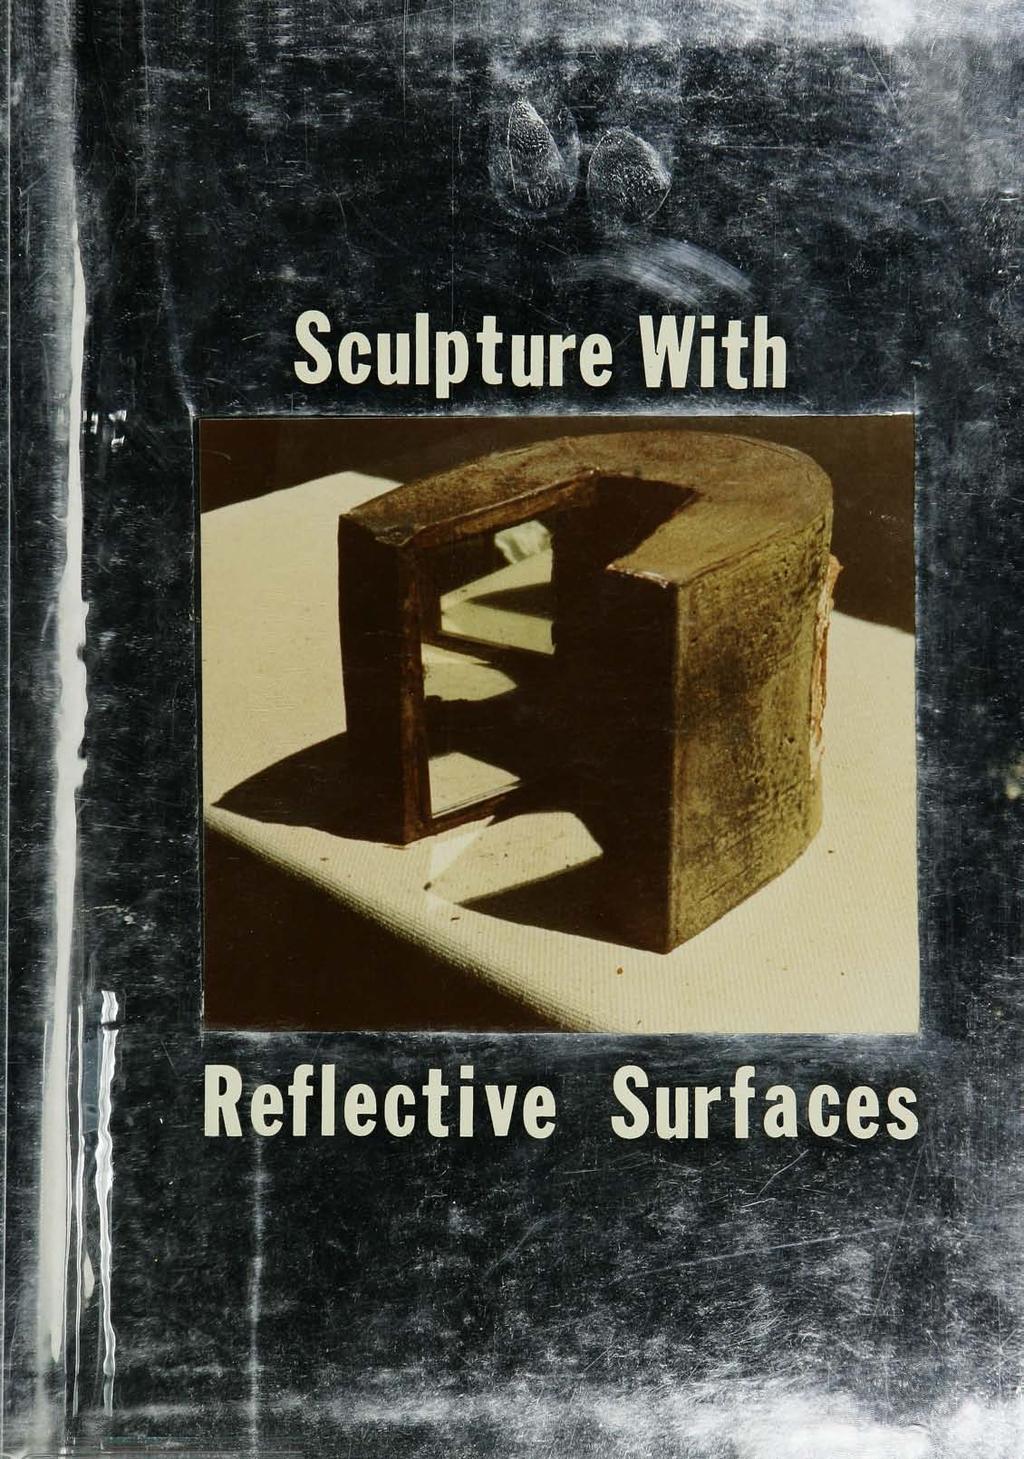 ' Sculpture With